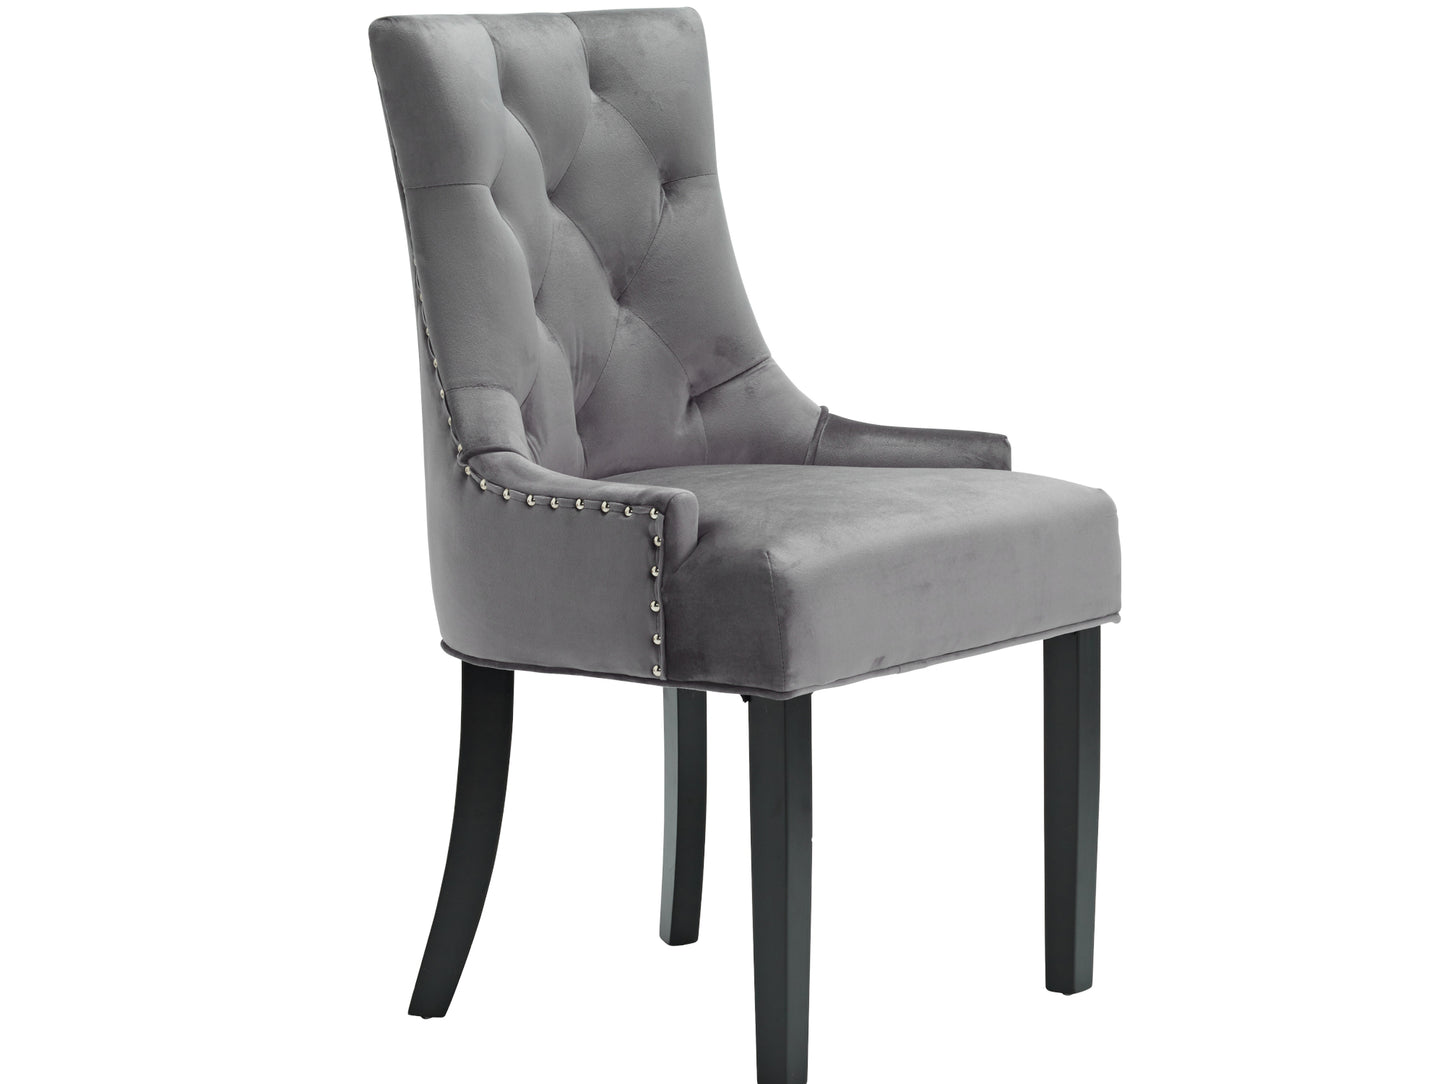 Morgan Dining Chair in Grey (2 Pack)